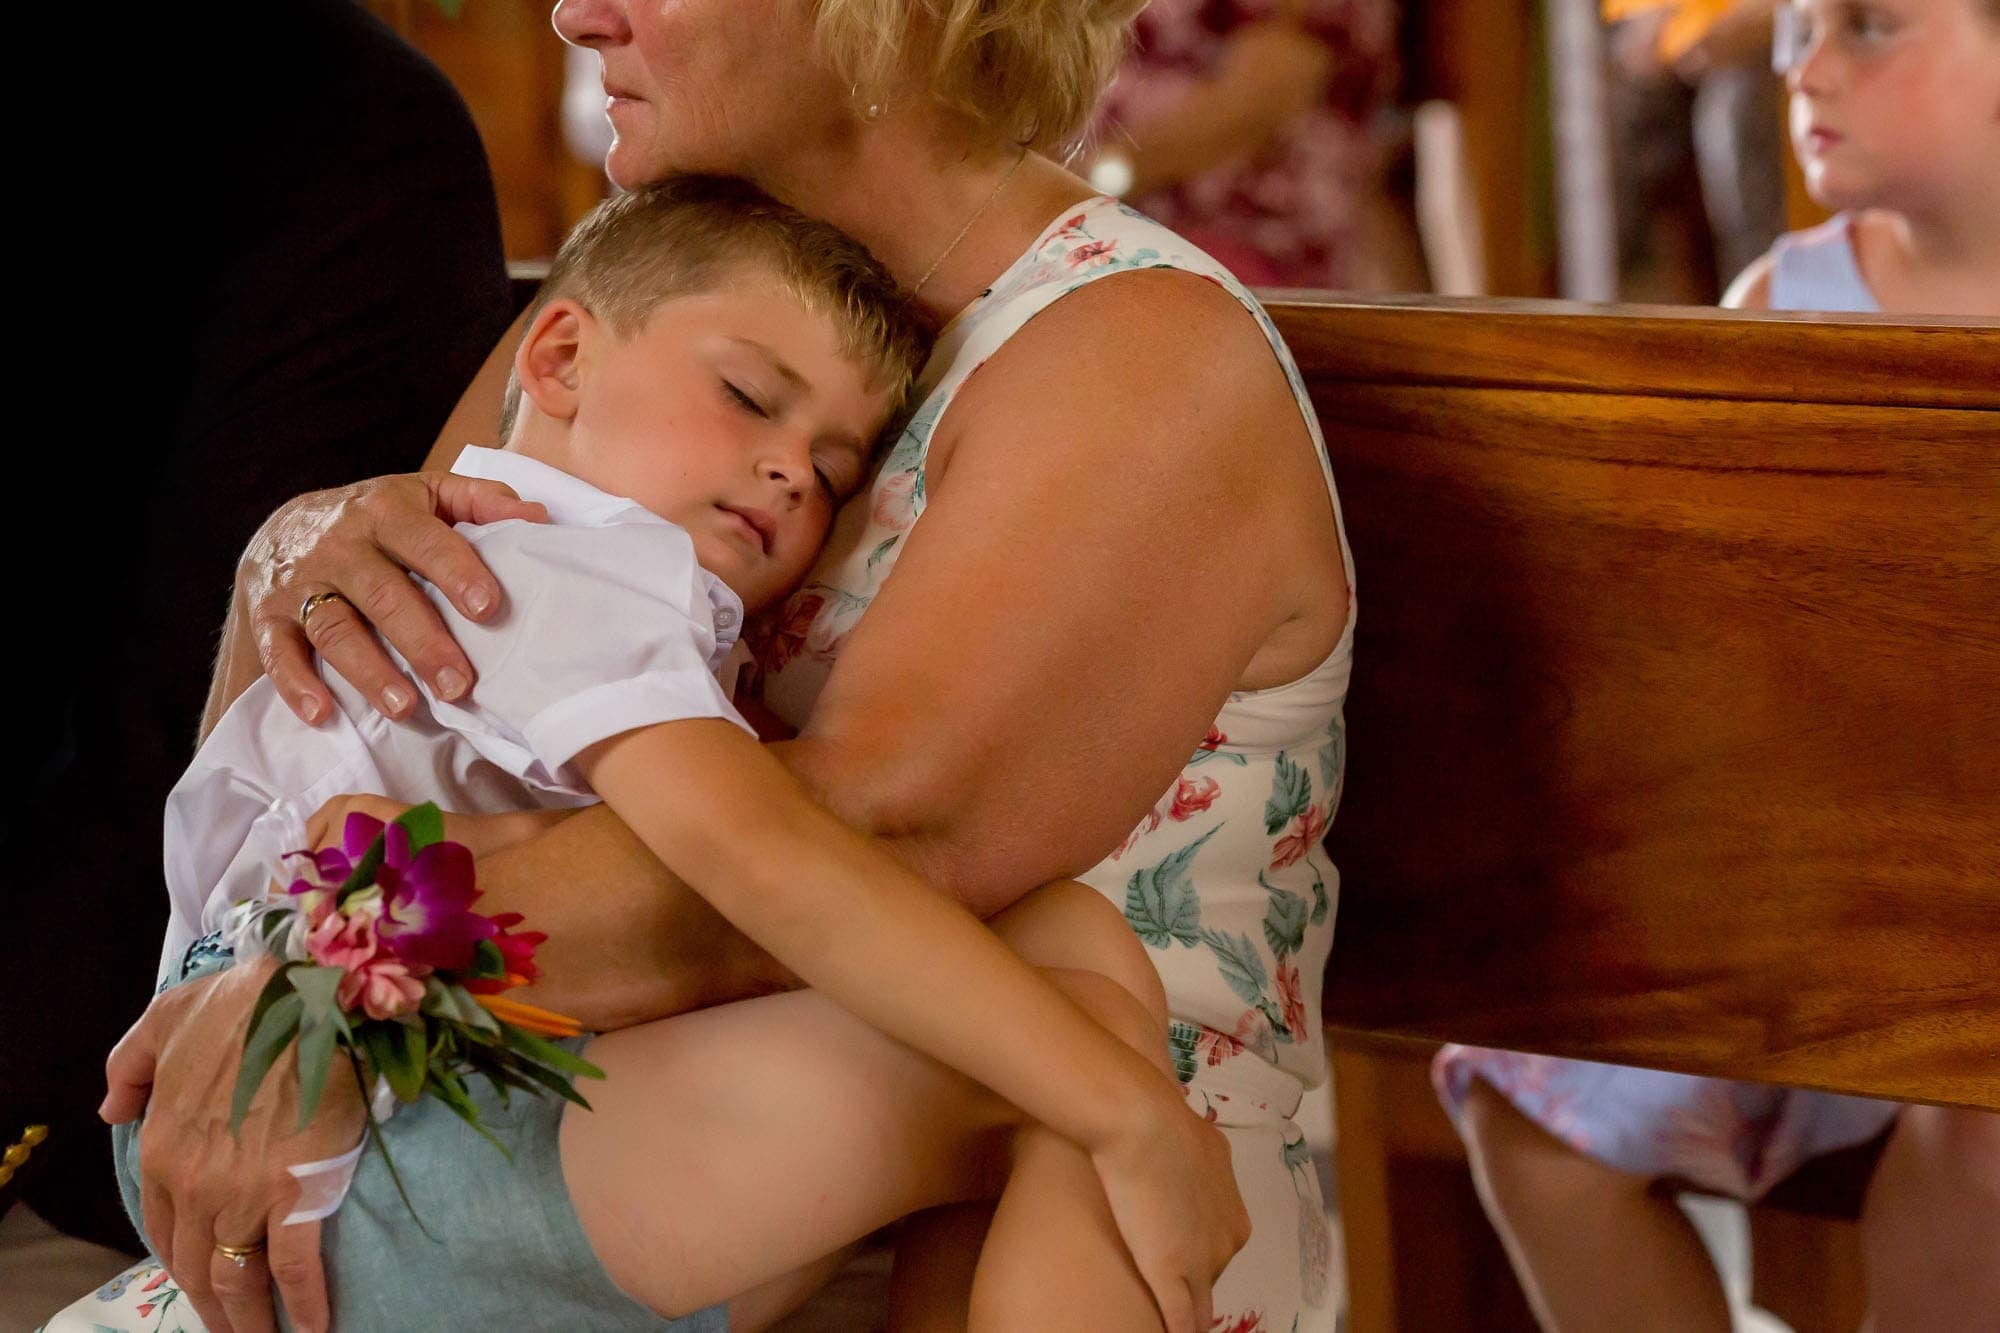 Little boy takes a nap during the church wedding ceremony